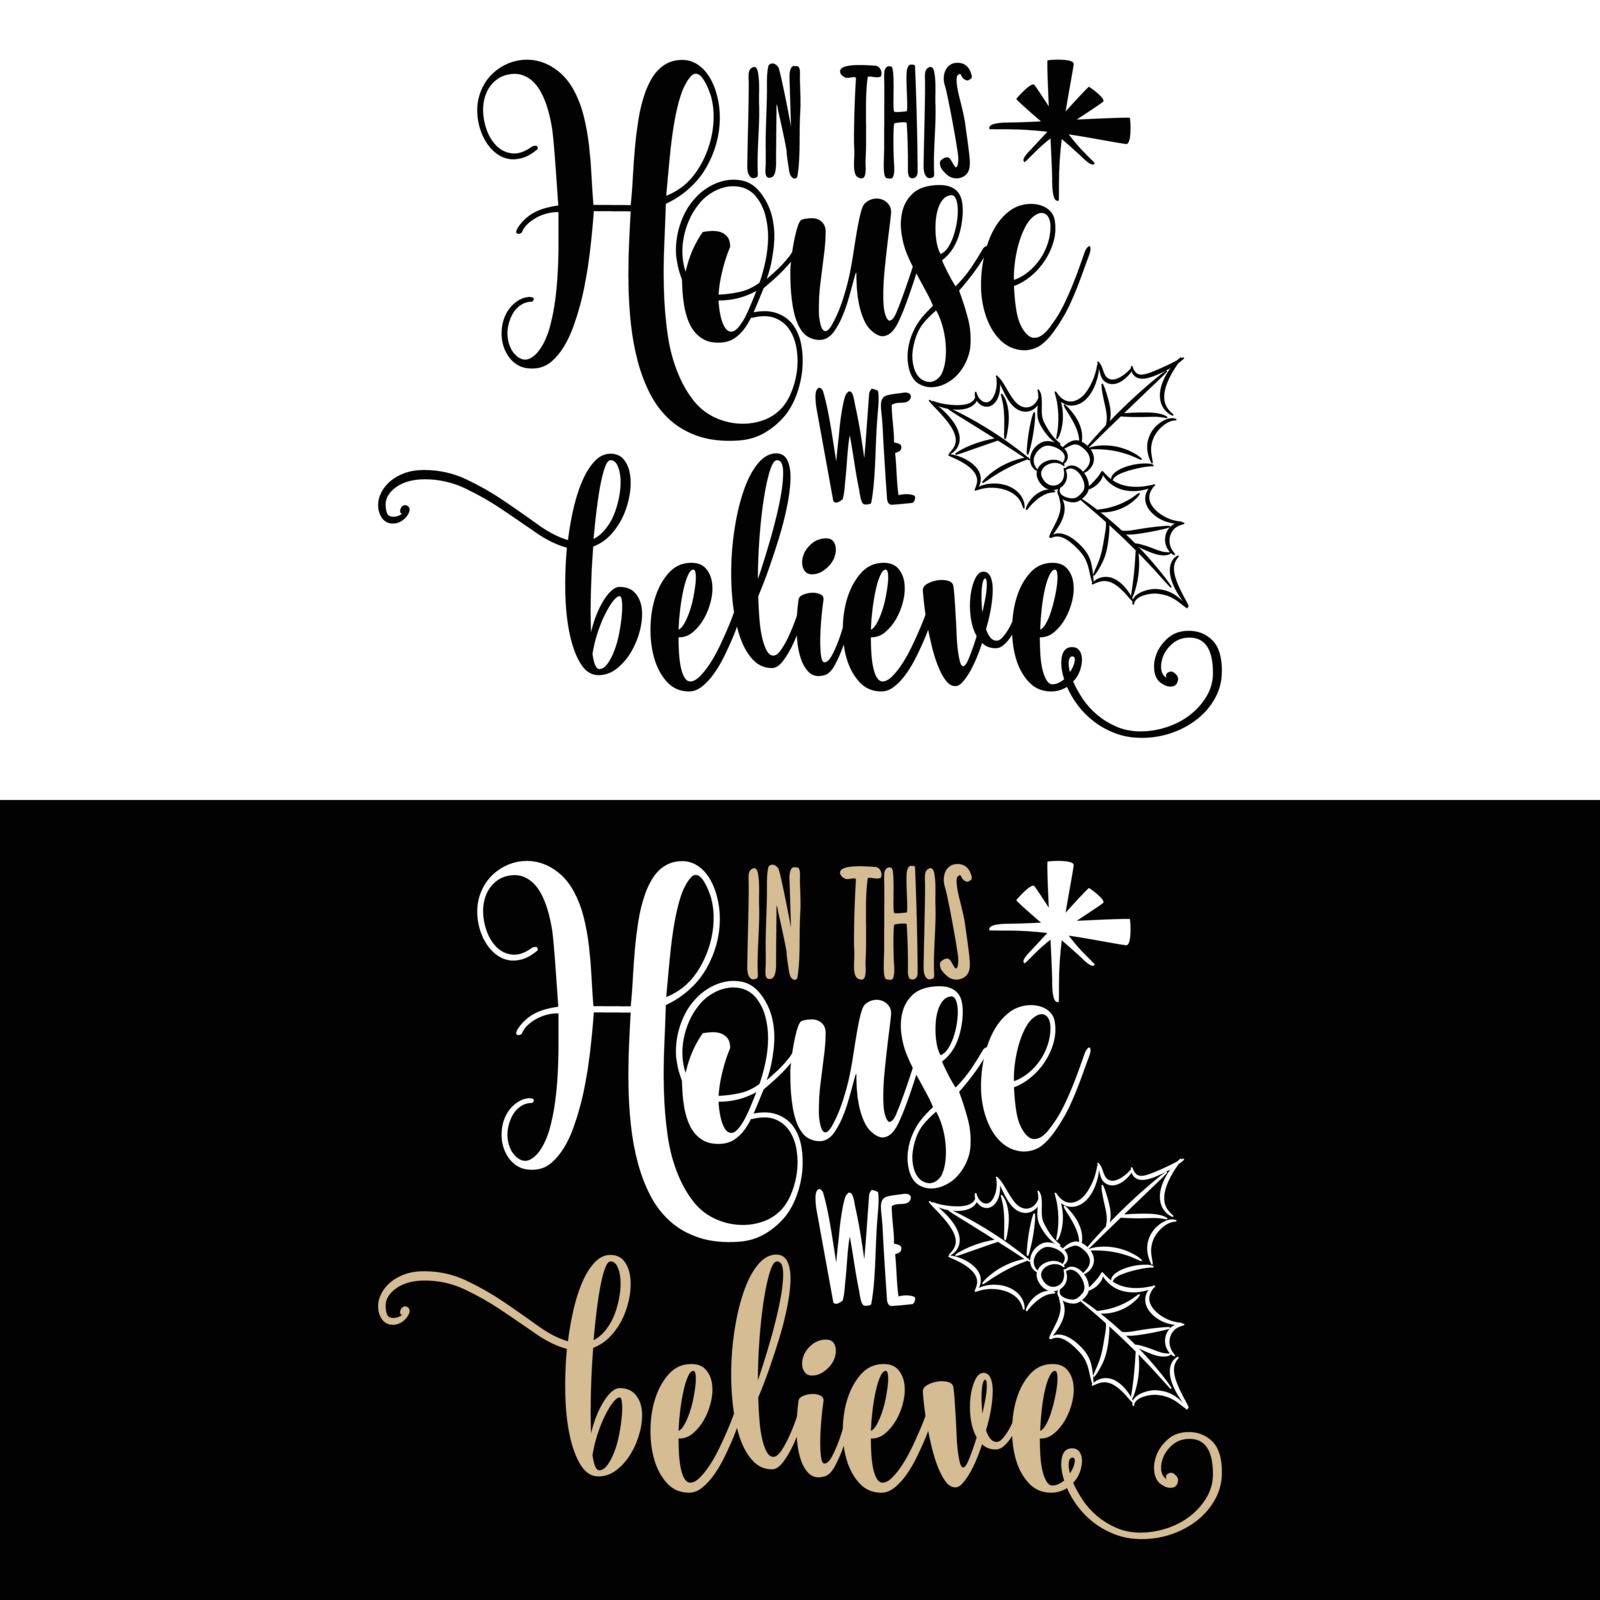 Christmas quote. In this house we believe . Christmas poster, banner, Christmas card